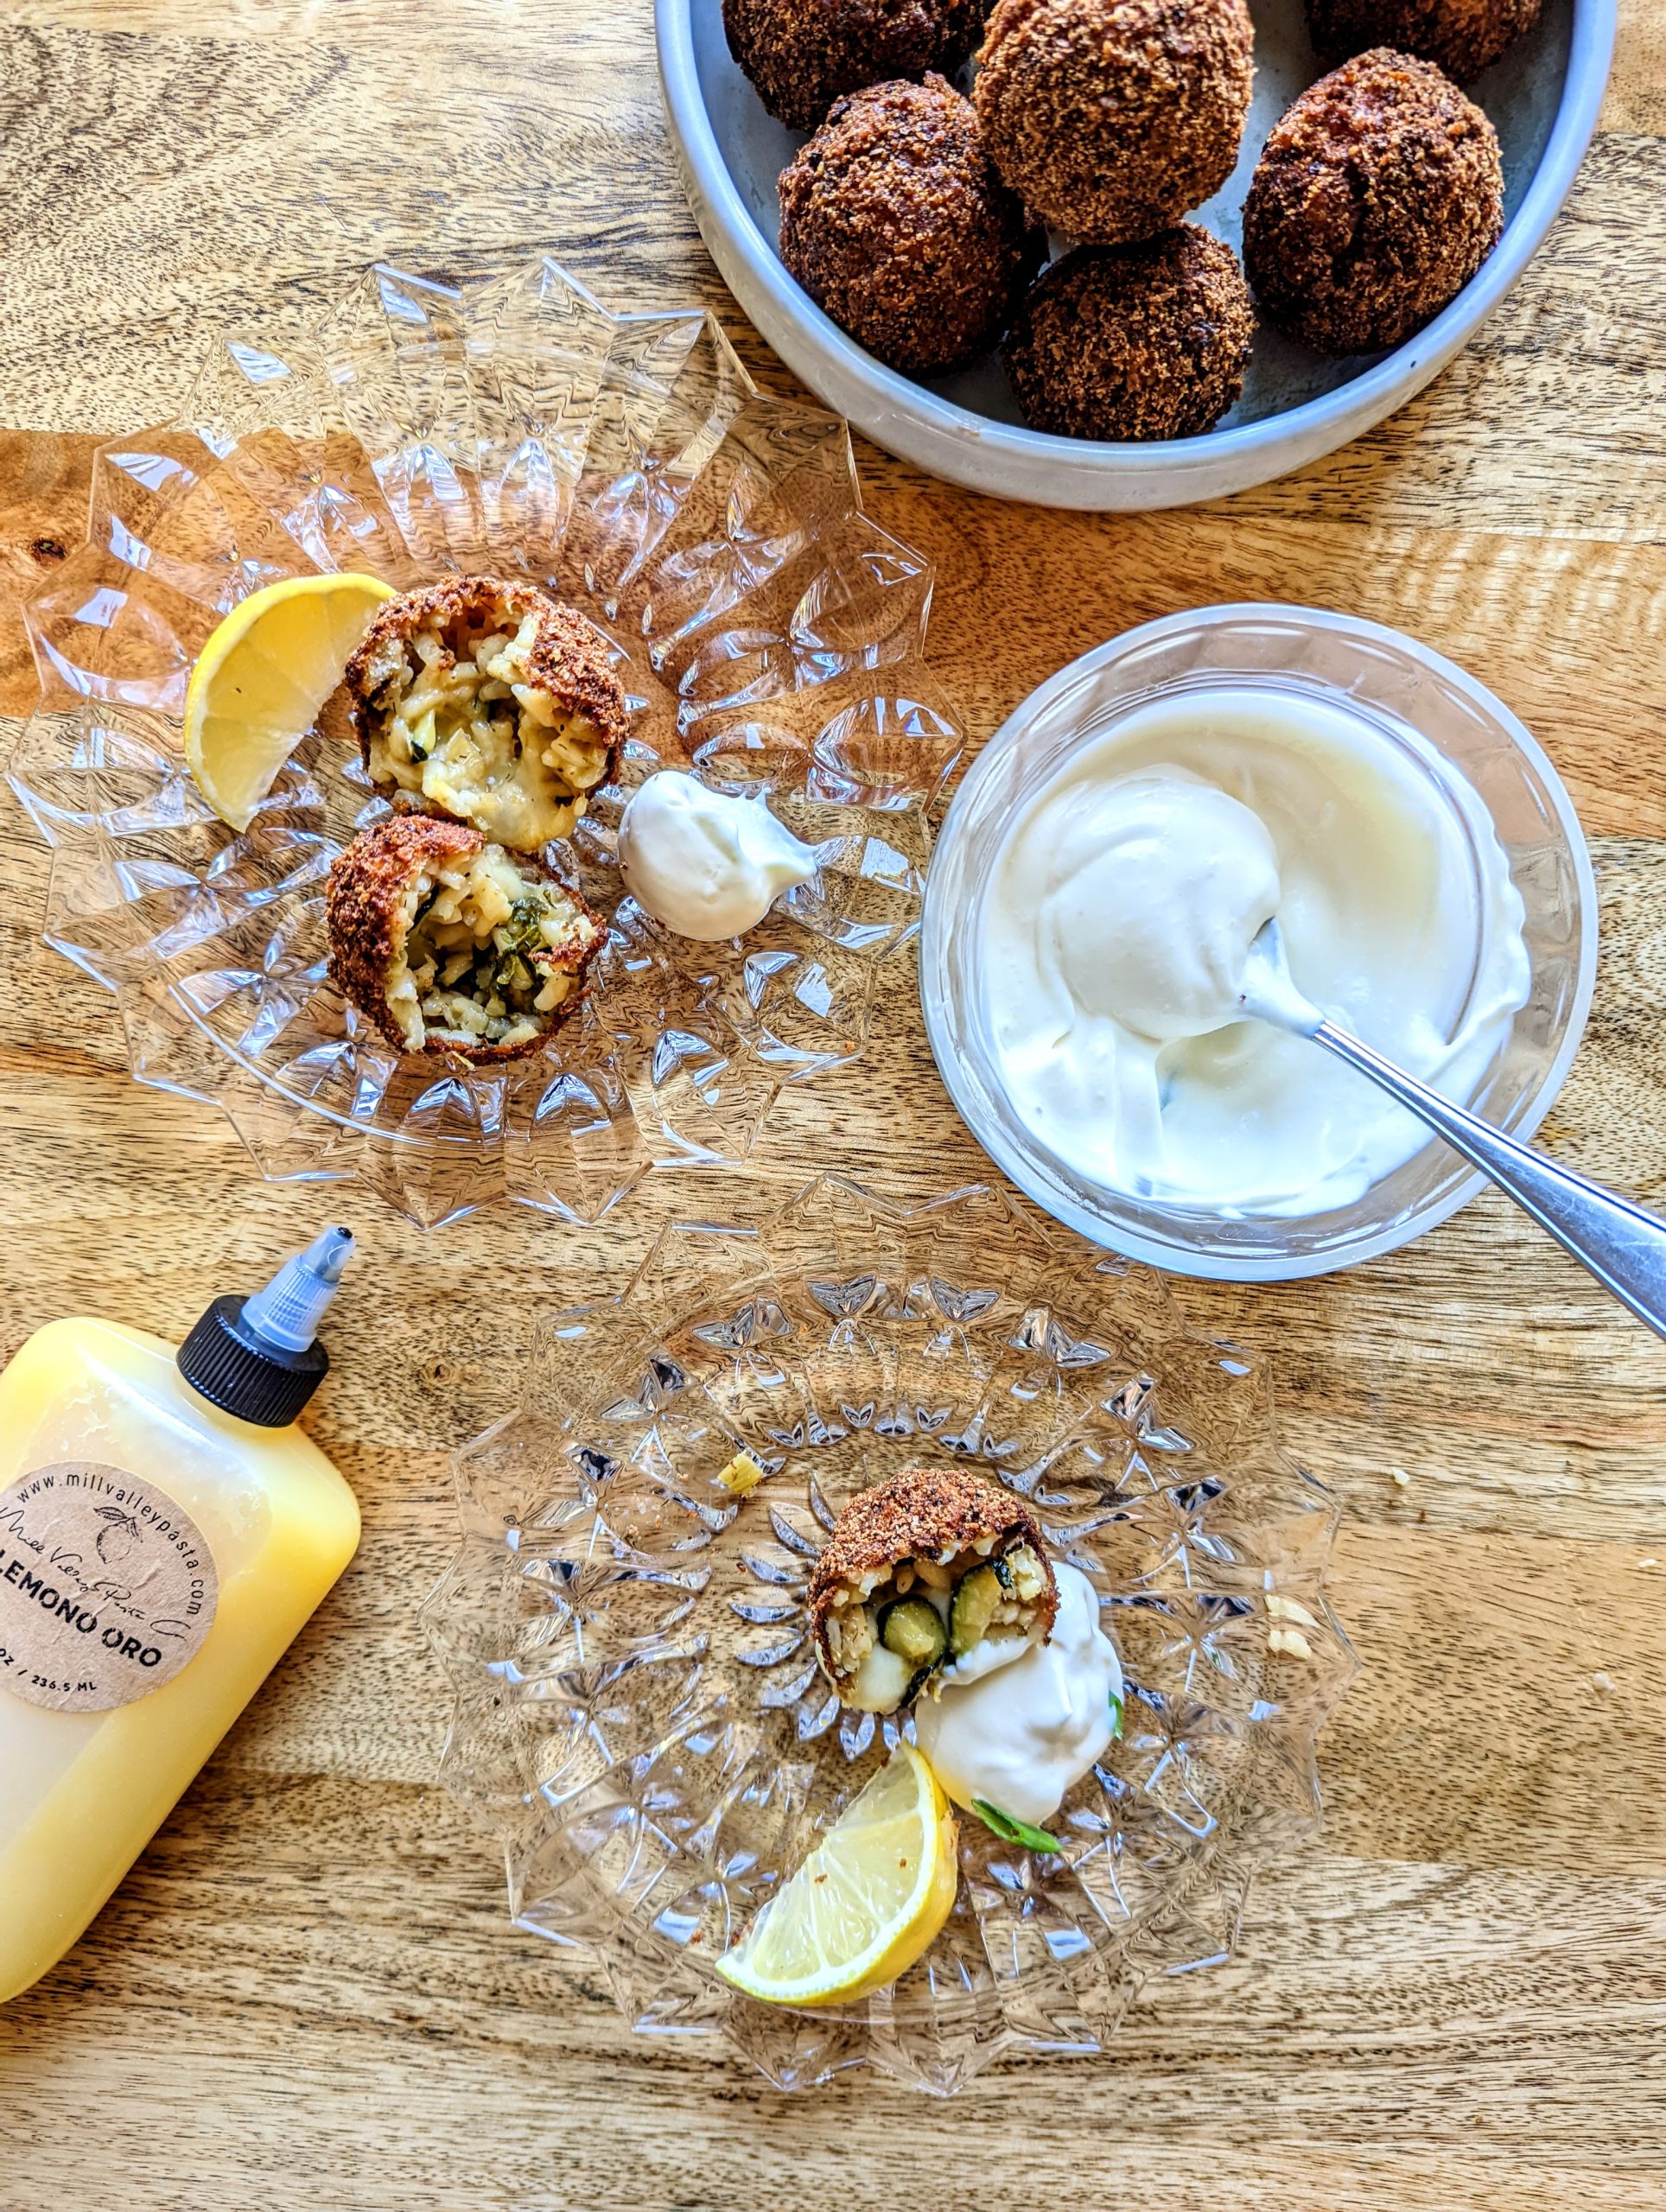 Crunchy and creamy arancini balls full of zucchini and melted cheese. A small bowl of preserved lemon aioli and a bottle or preserved lemon puree can be seen in the photo.